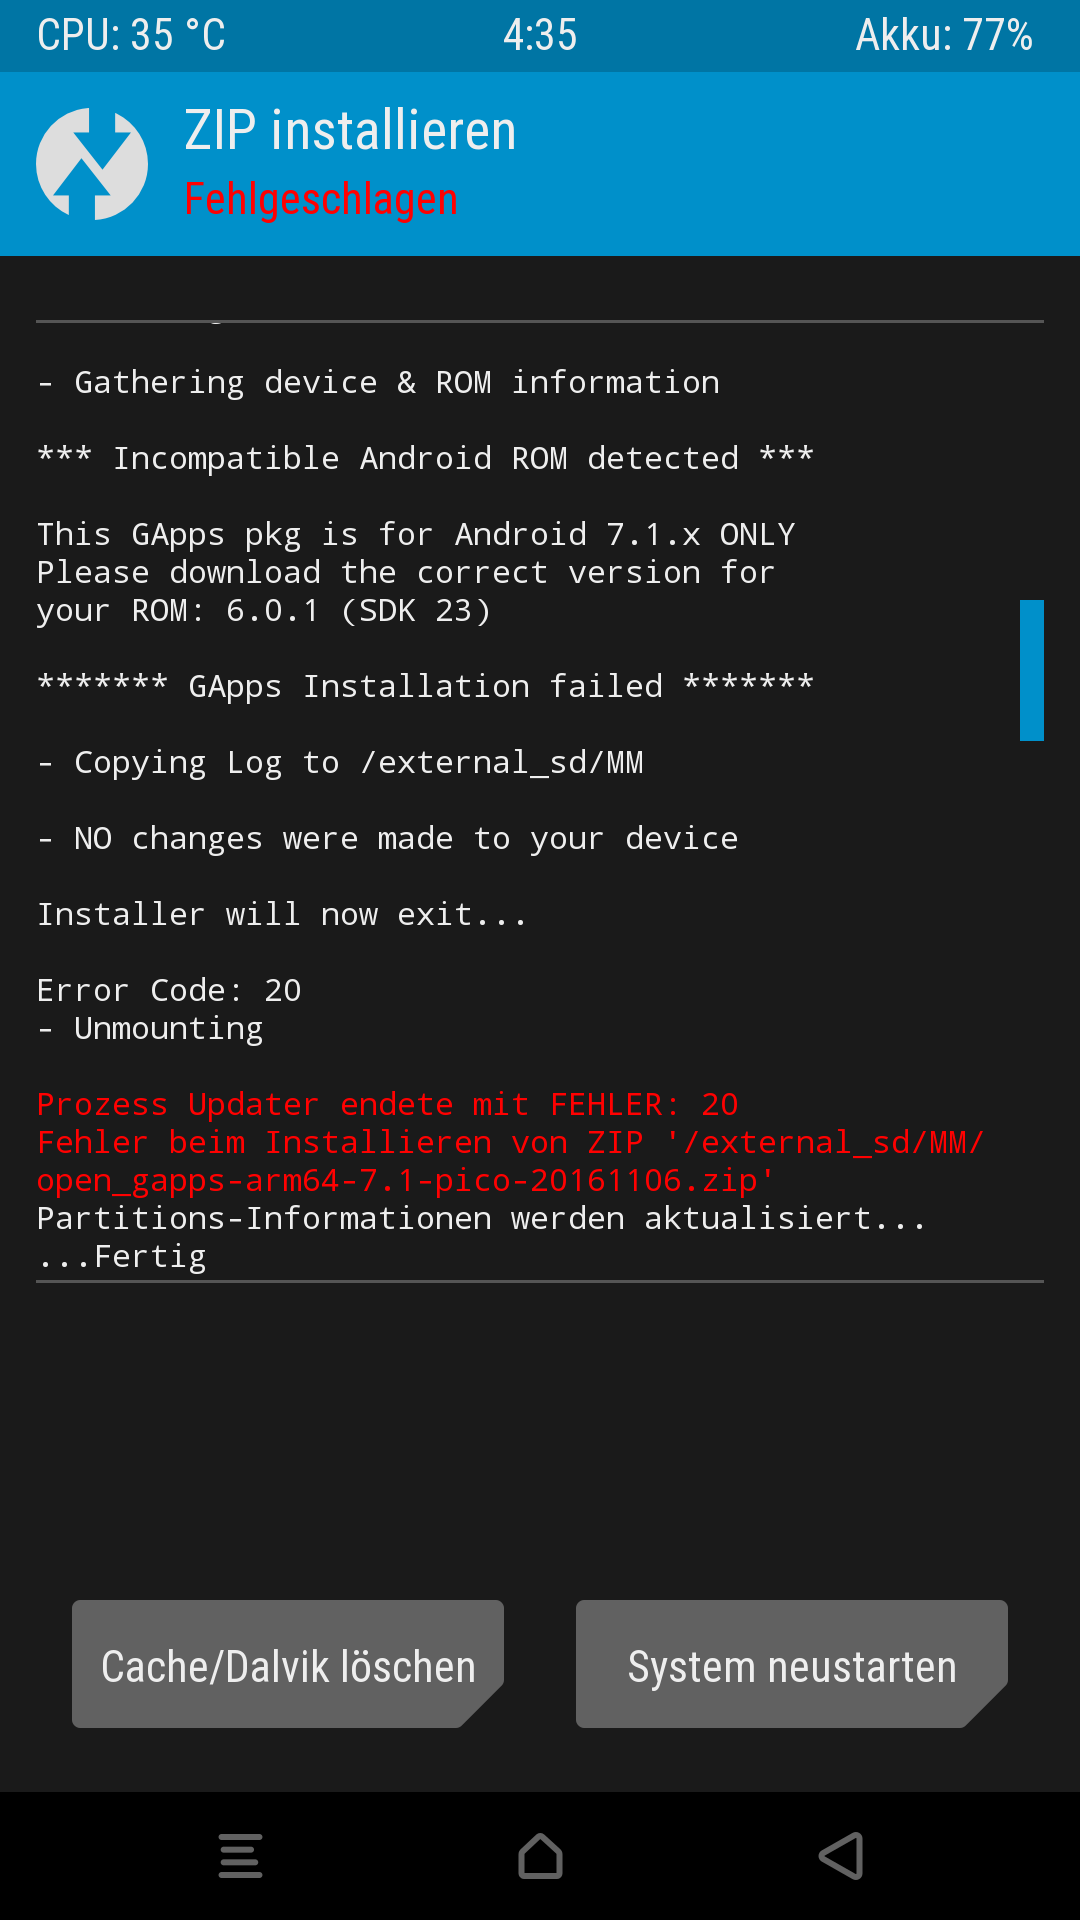 Installing system update. Gapps Прошивка. TWRP Error 1. System failed Android. System failed на телефоне.